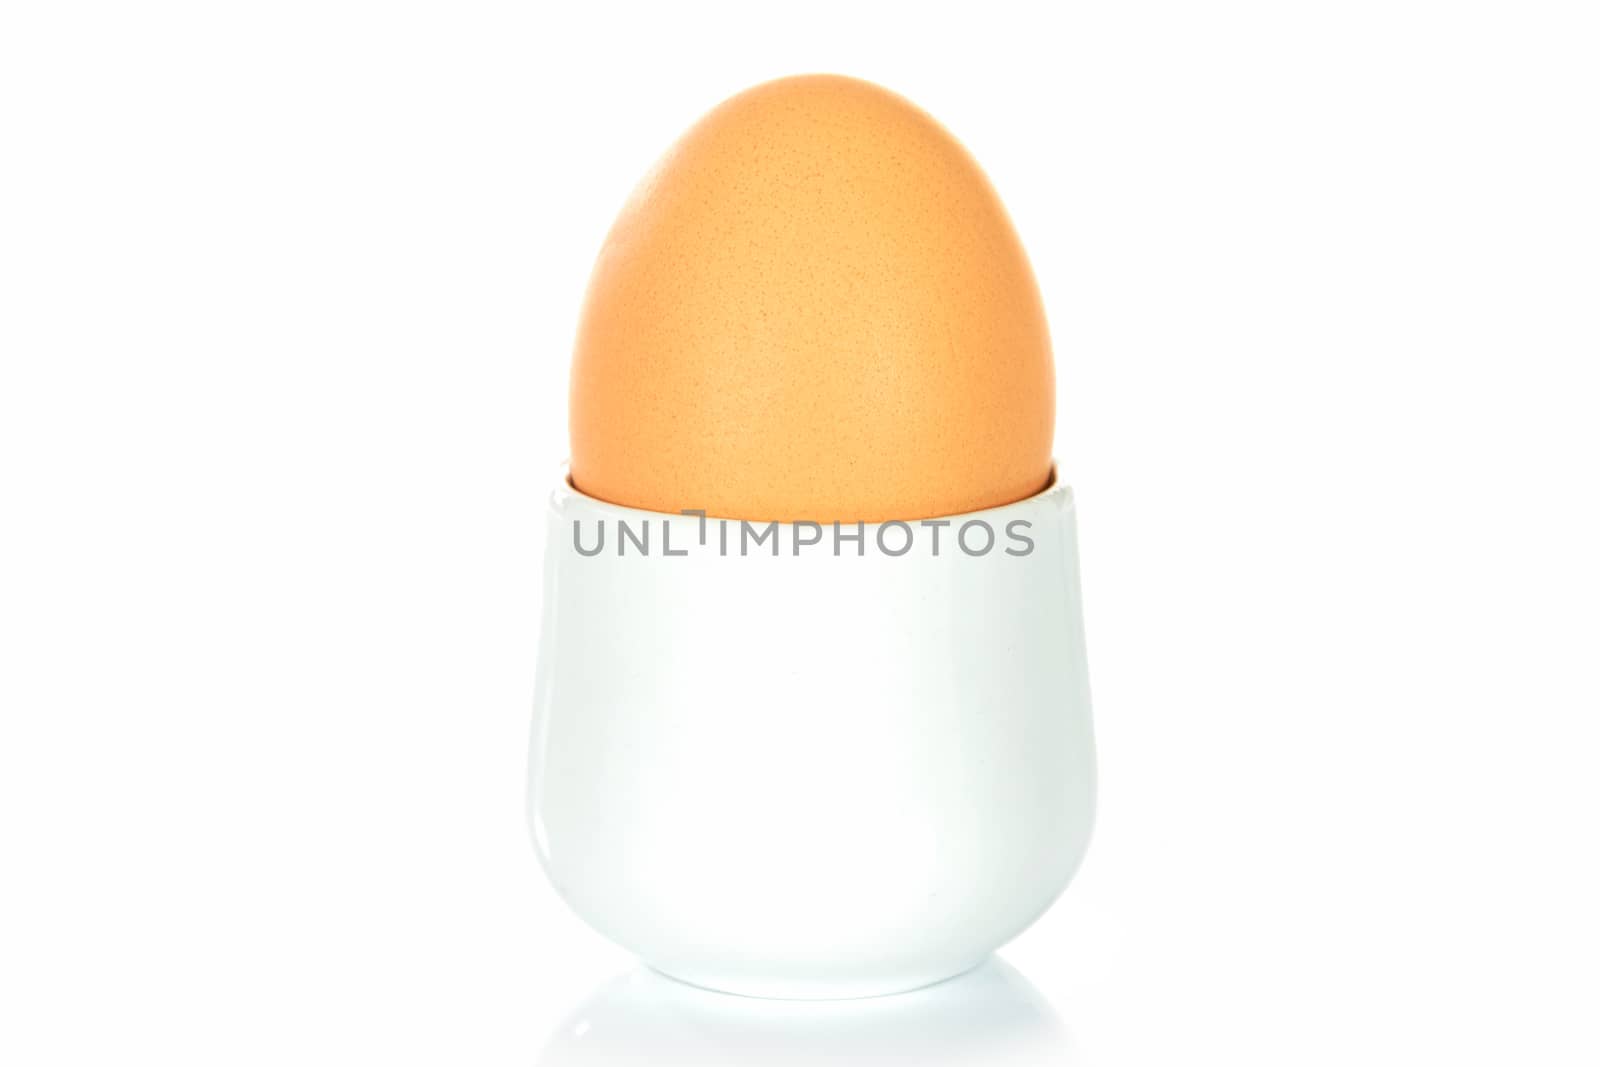 Boiled egg in an egg cup on a white background.